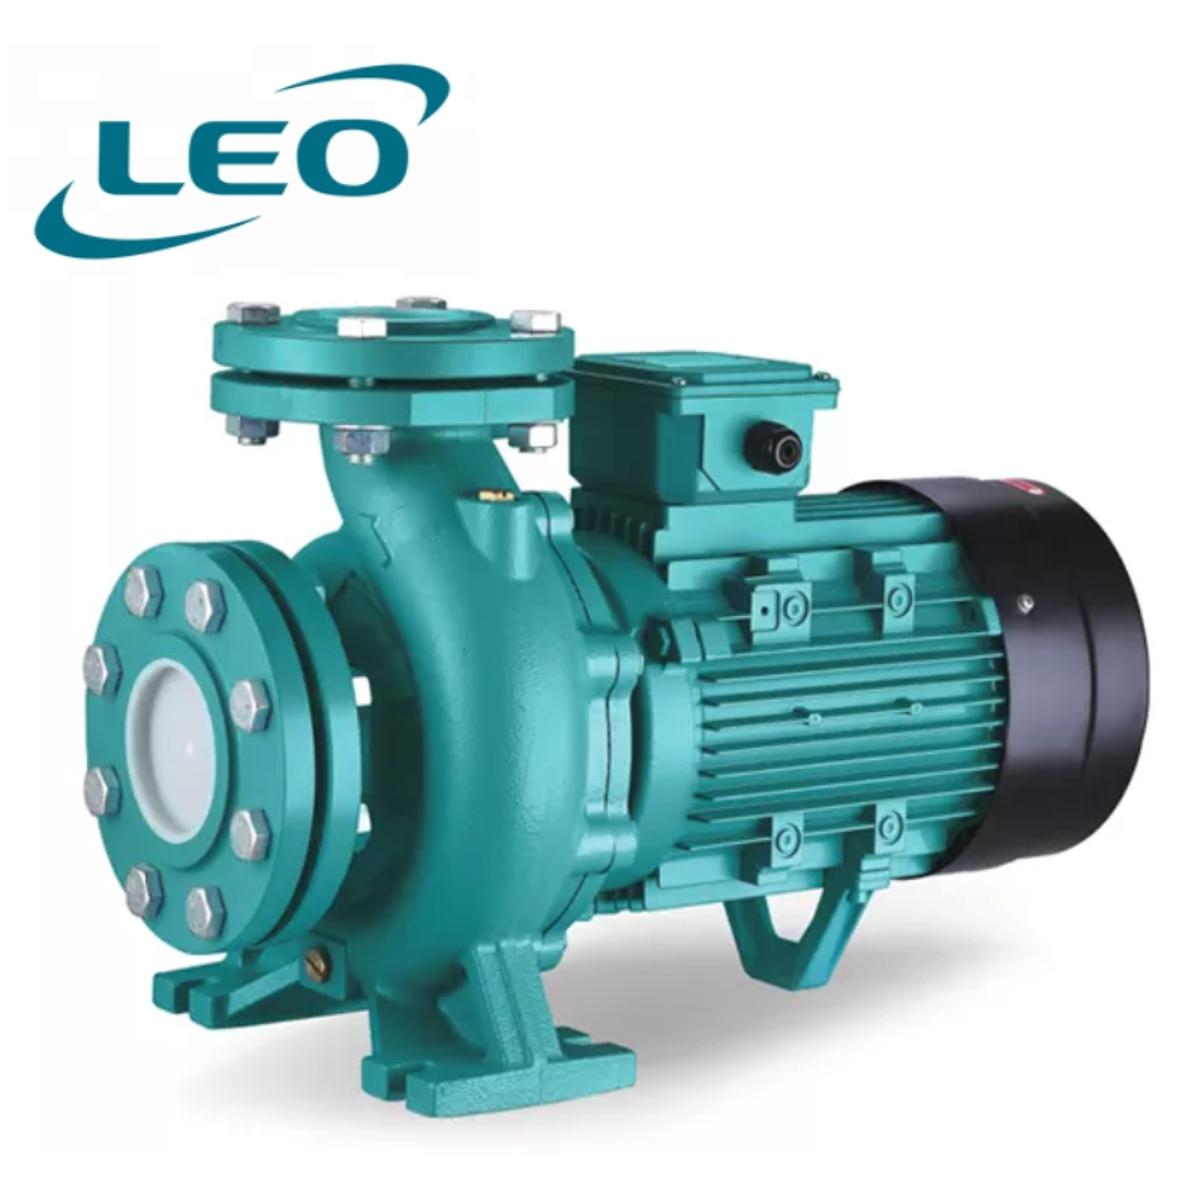 LEO - XST-50-160-75 - 7500 W - 10 HP - Clean Water HEAVY DUTY Centrifugal Pump With FLANGES  - 380V~400V THREE PHASE - SIZE :- 2 1-2" x 2 " - European STANDARD